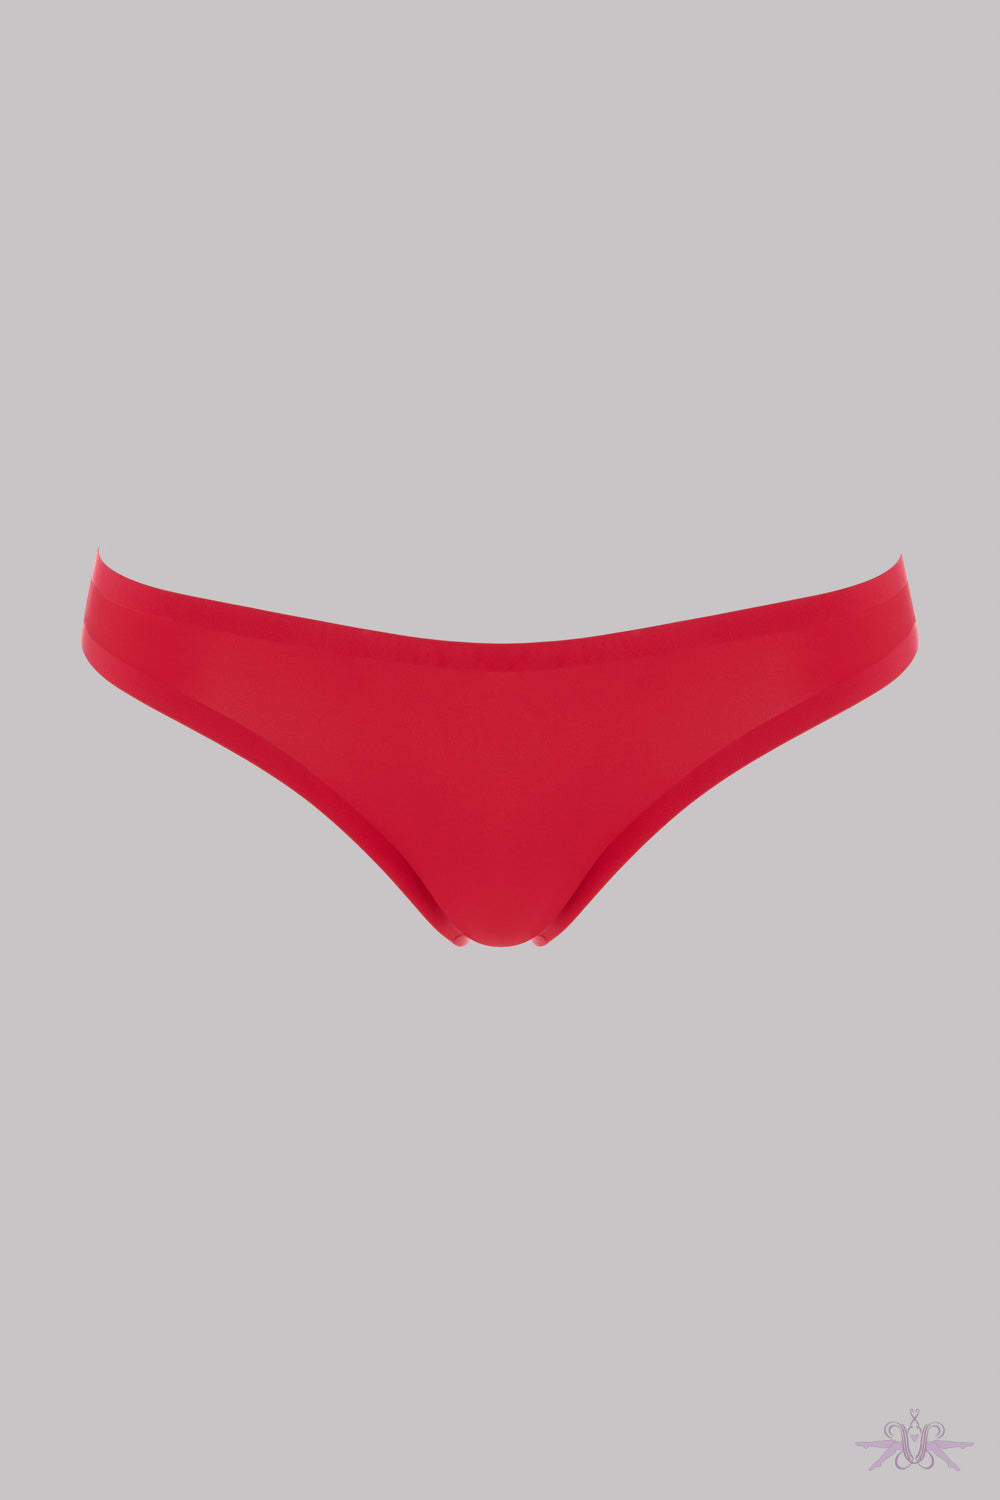 Maison Close Tapage Nocturne Red Openable Thong at the Hosiery Box Red  Lingerie - The Hosiery Box